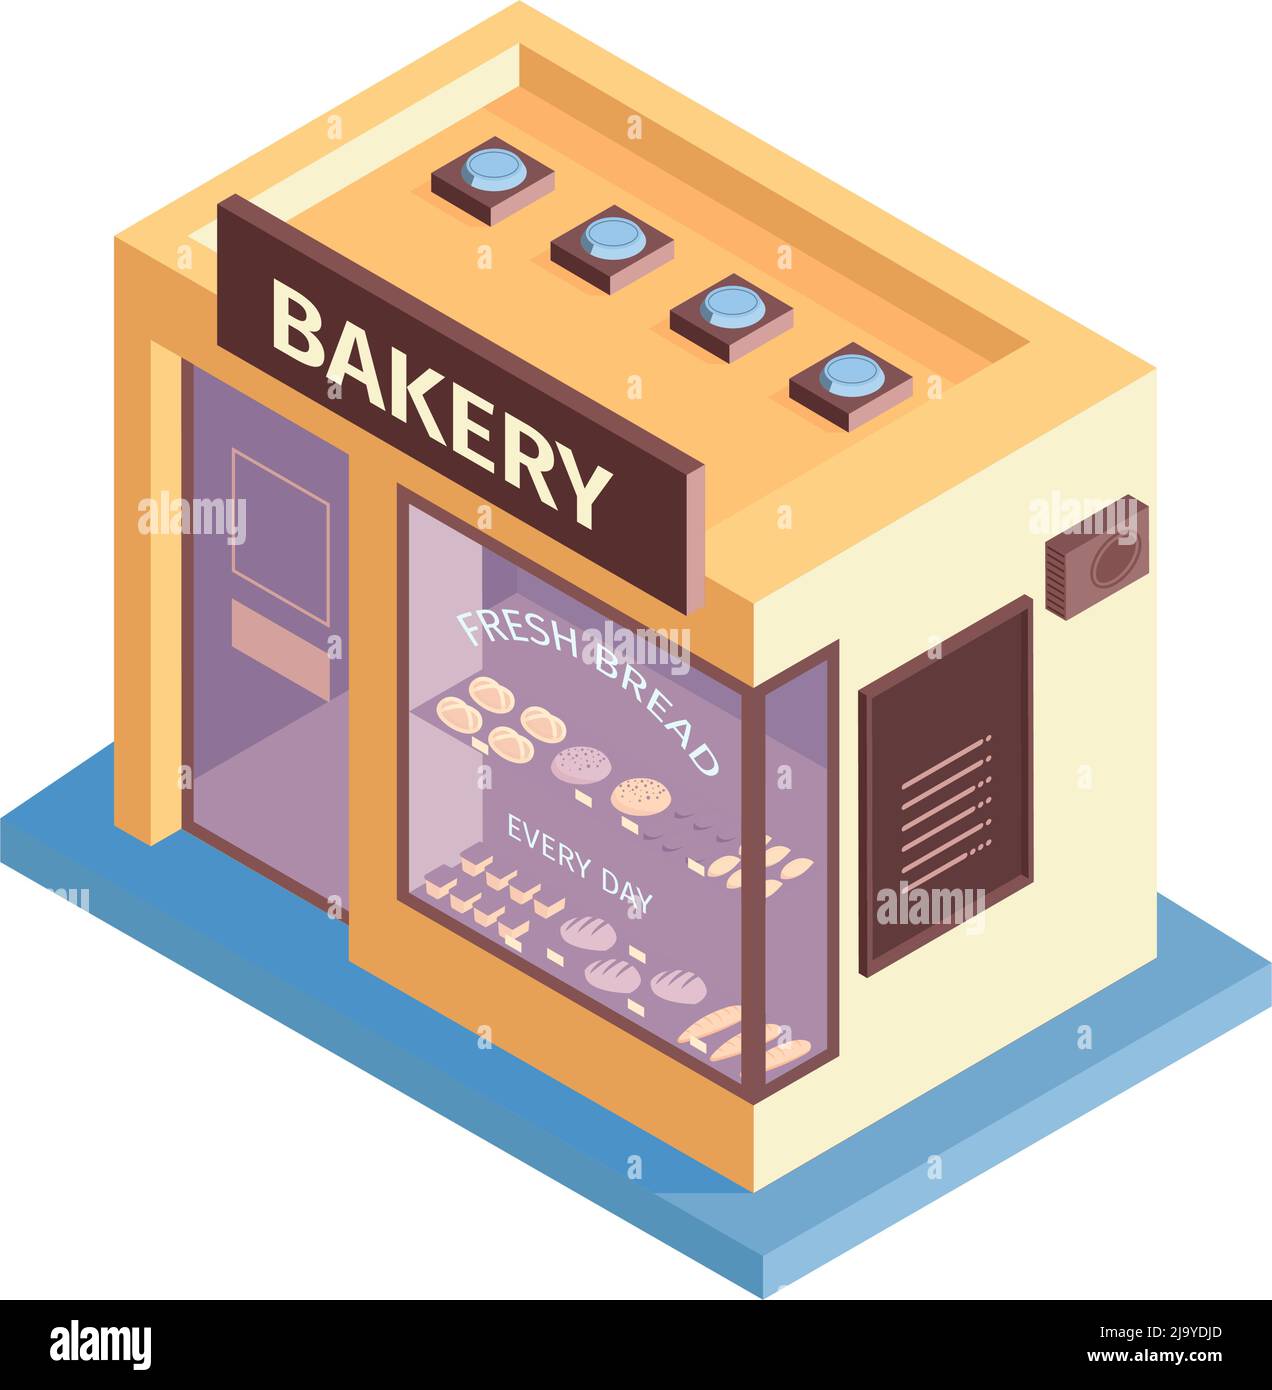 Isometric shops composition with isolated image of bakery building on blank background vector illustration Stock Vector